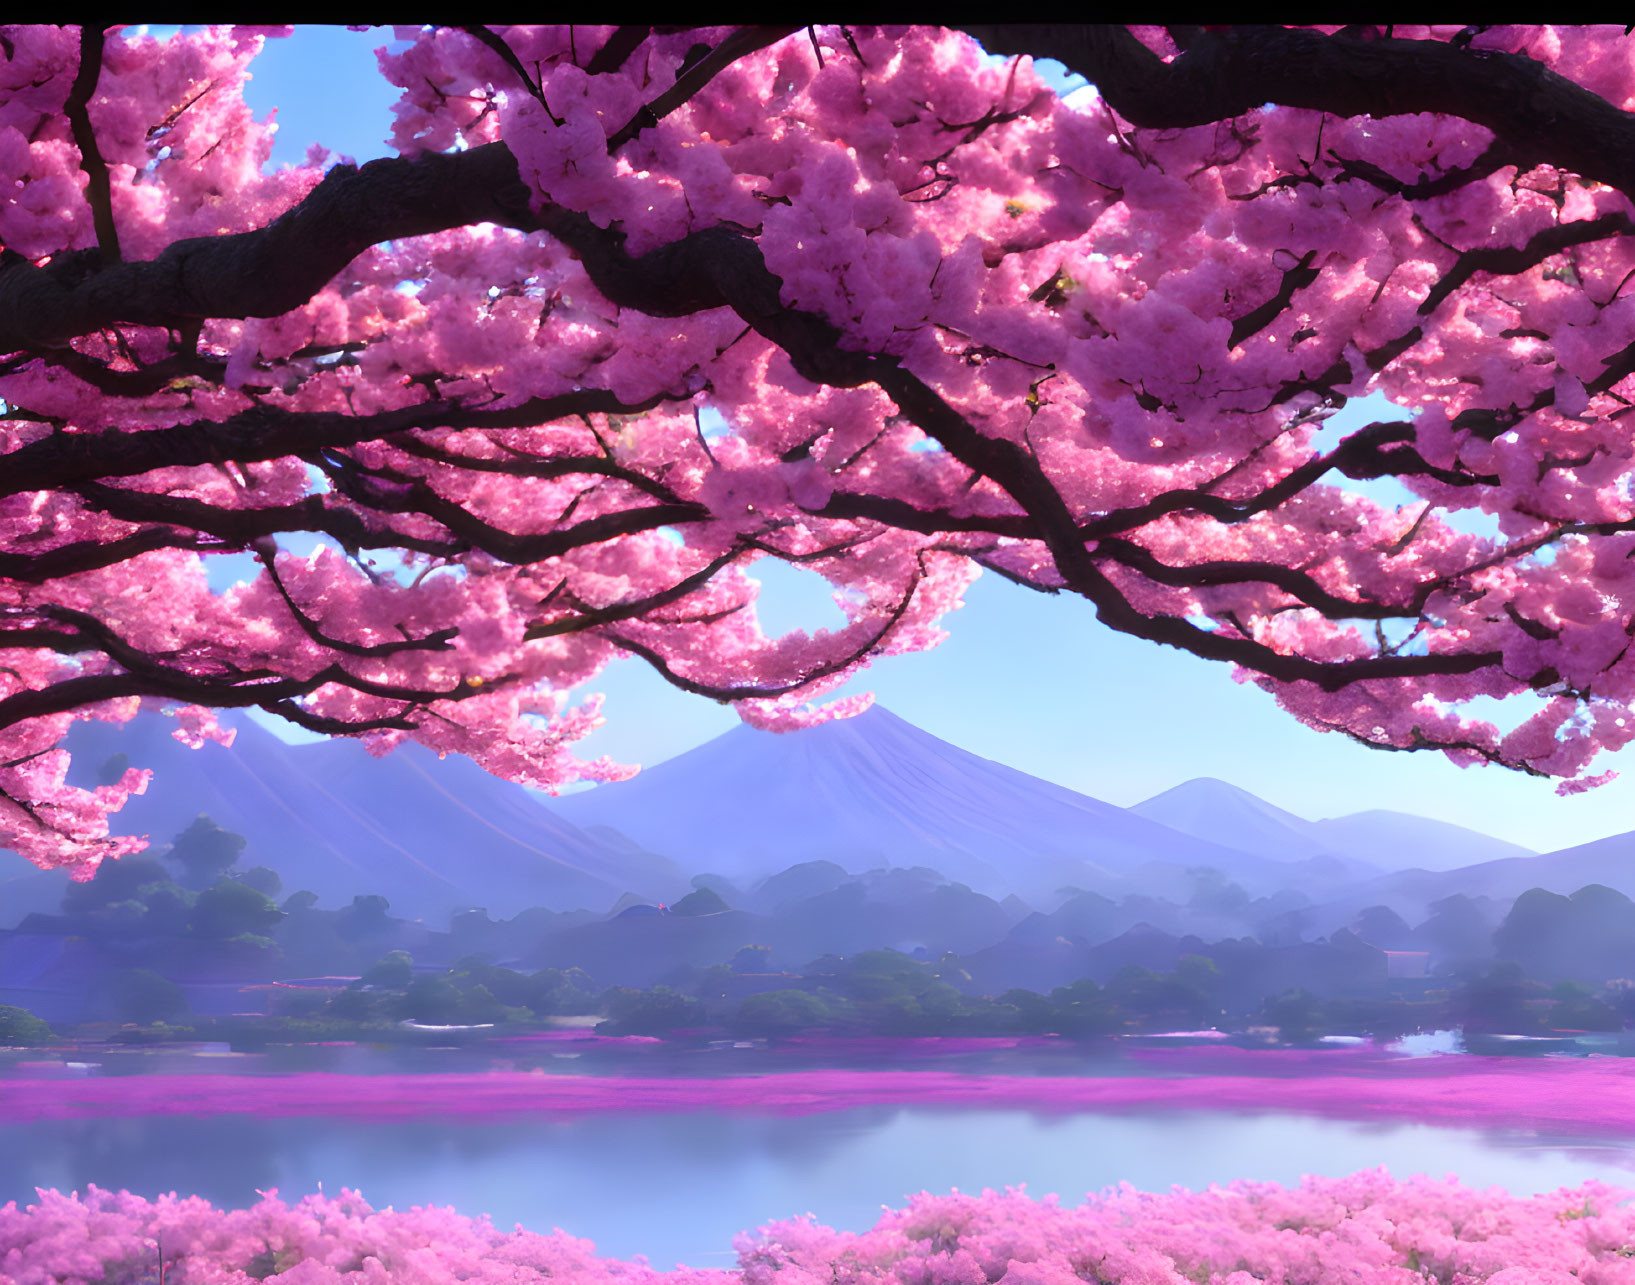 Scenic landscape: cherry blossoms, lake, mountains, clear sky